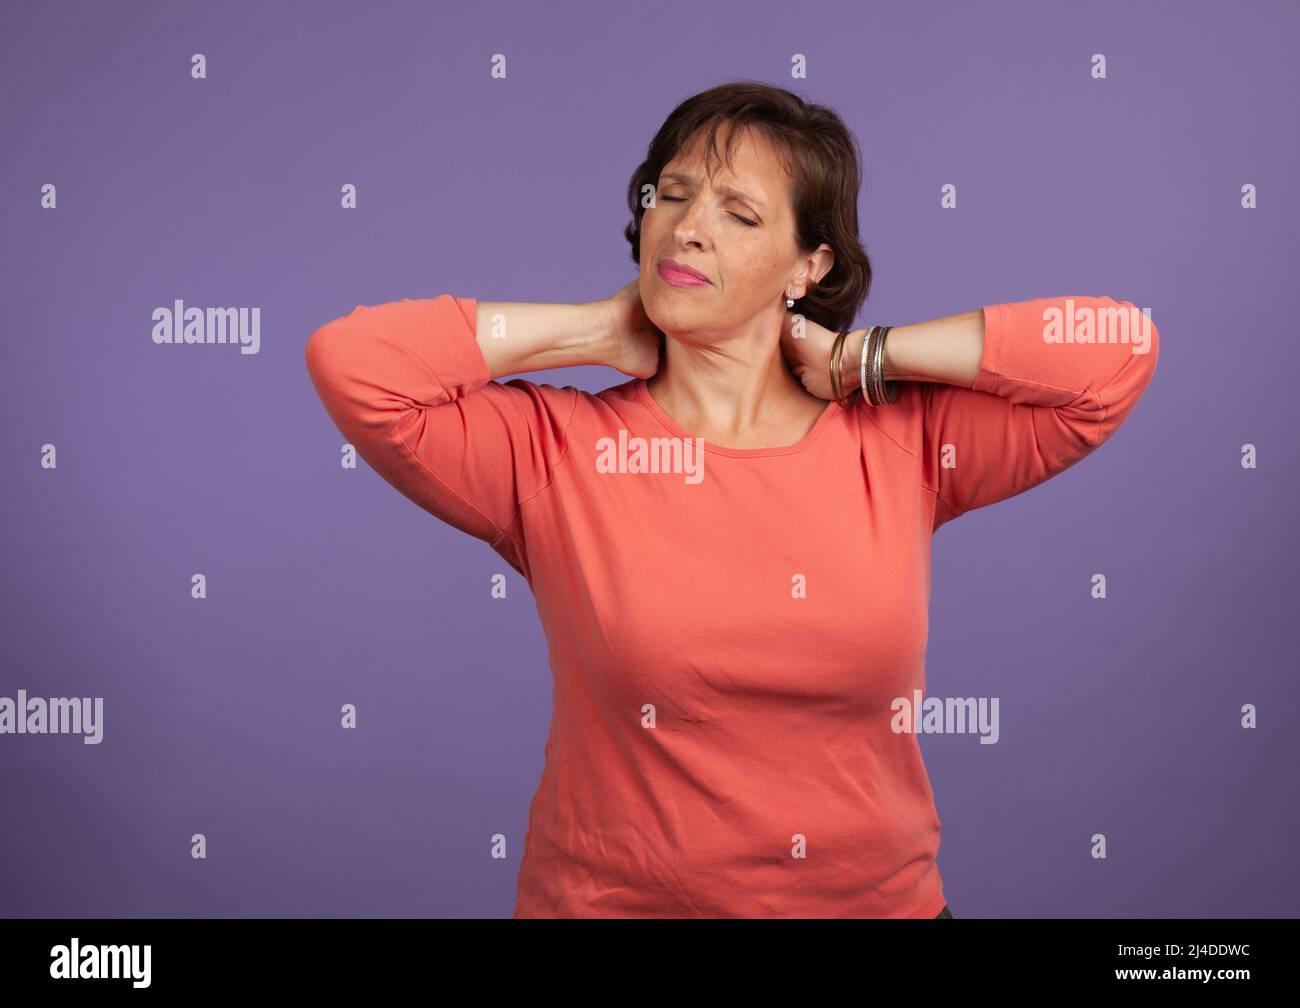 Middle Aged woman with neck and shoulder pain holding her neck  and making a pained expression. Chronic Pain concept image. Stock Photo